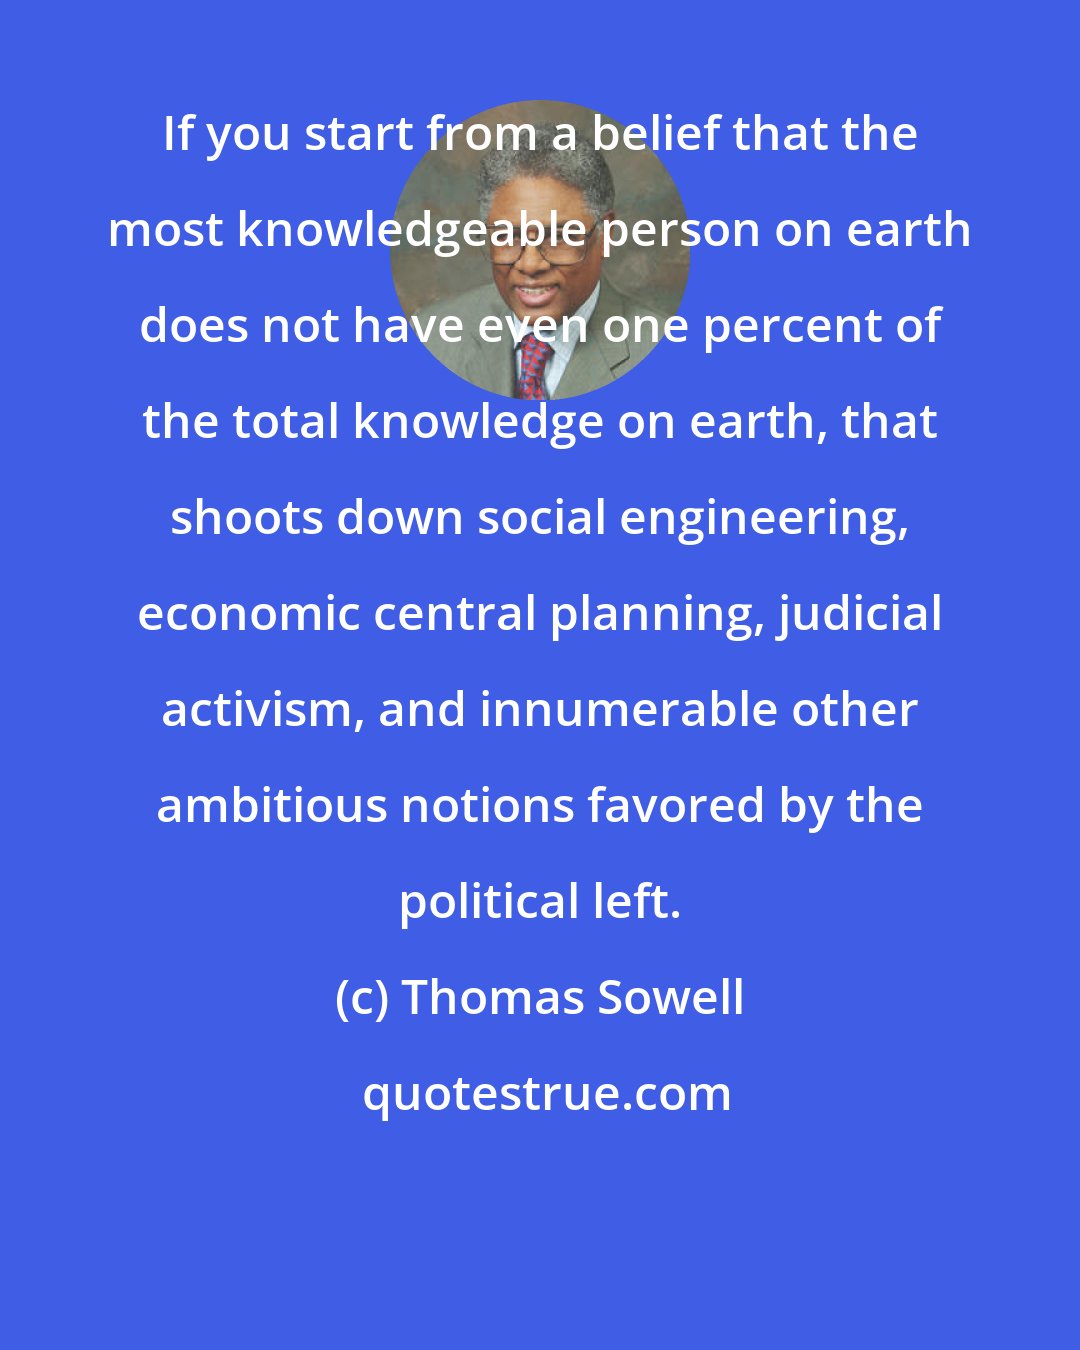 Thomas Sowell: If you start from a belief that the most knowledgeable person on earth does not have even one percent of the total knowledge on earth, that shoots down social engineering, economic central planning, judicial activism, and innumerable other ambitious notions favored by the political left.